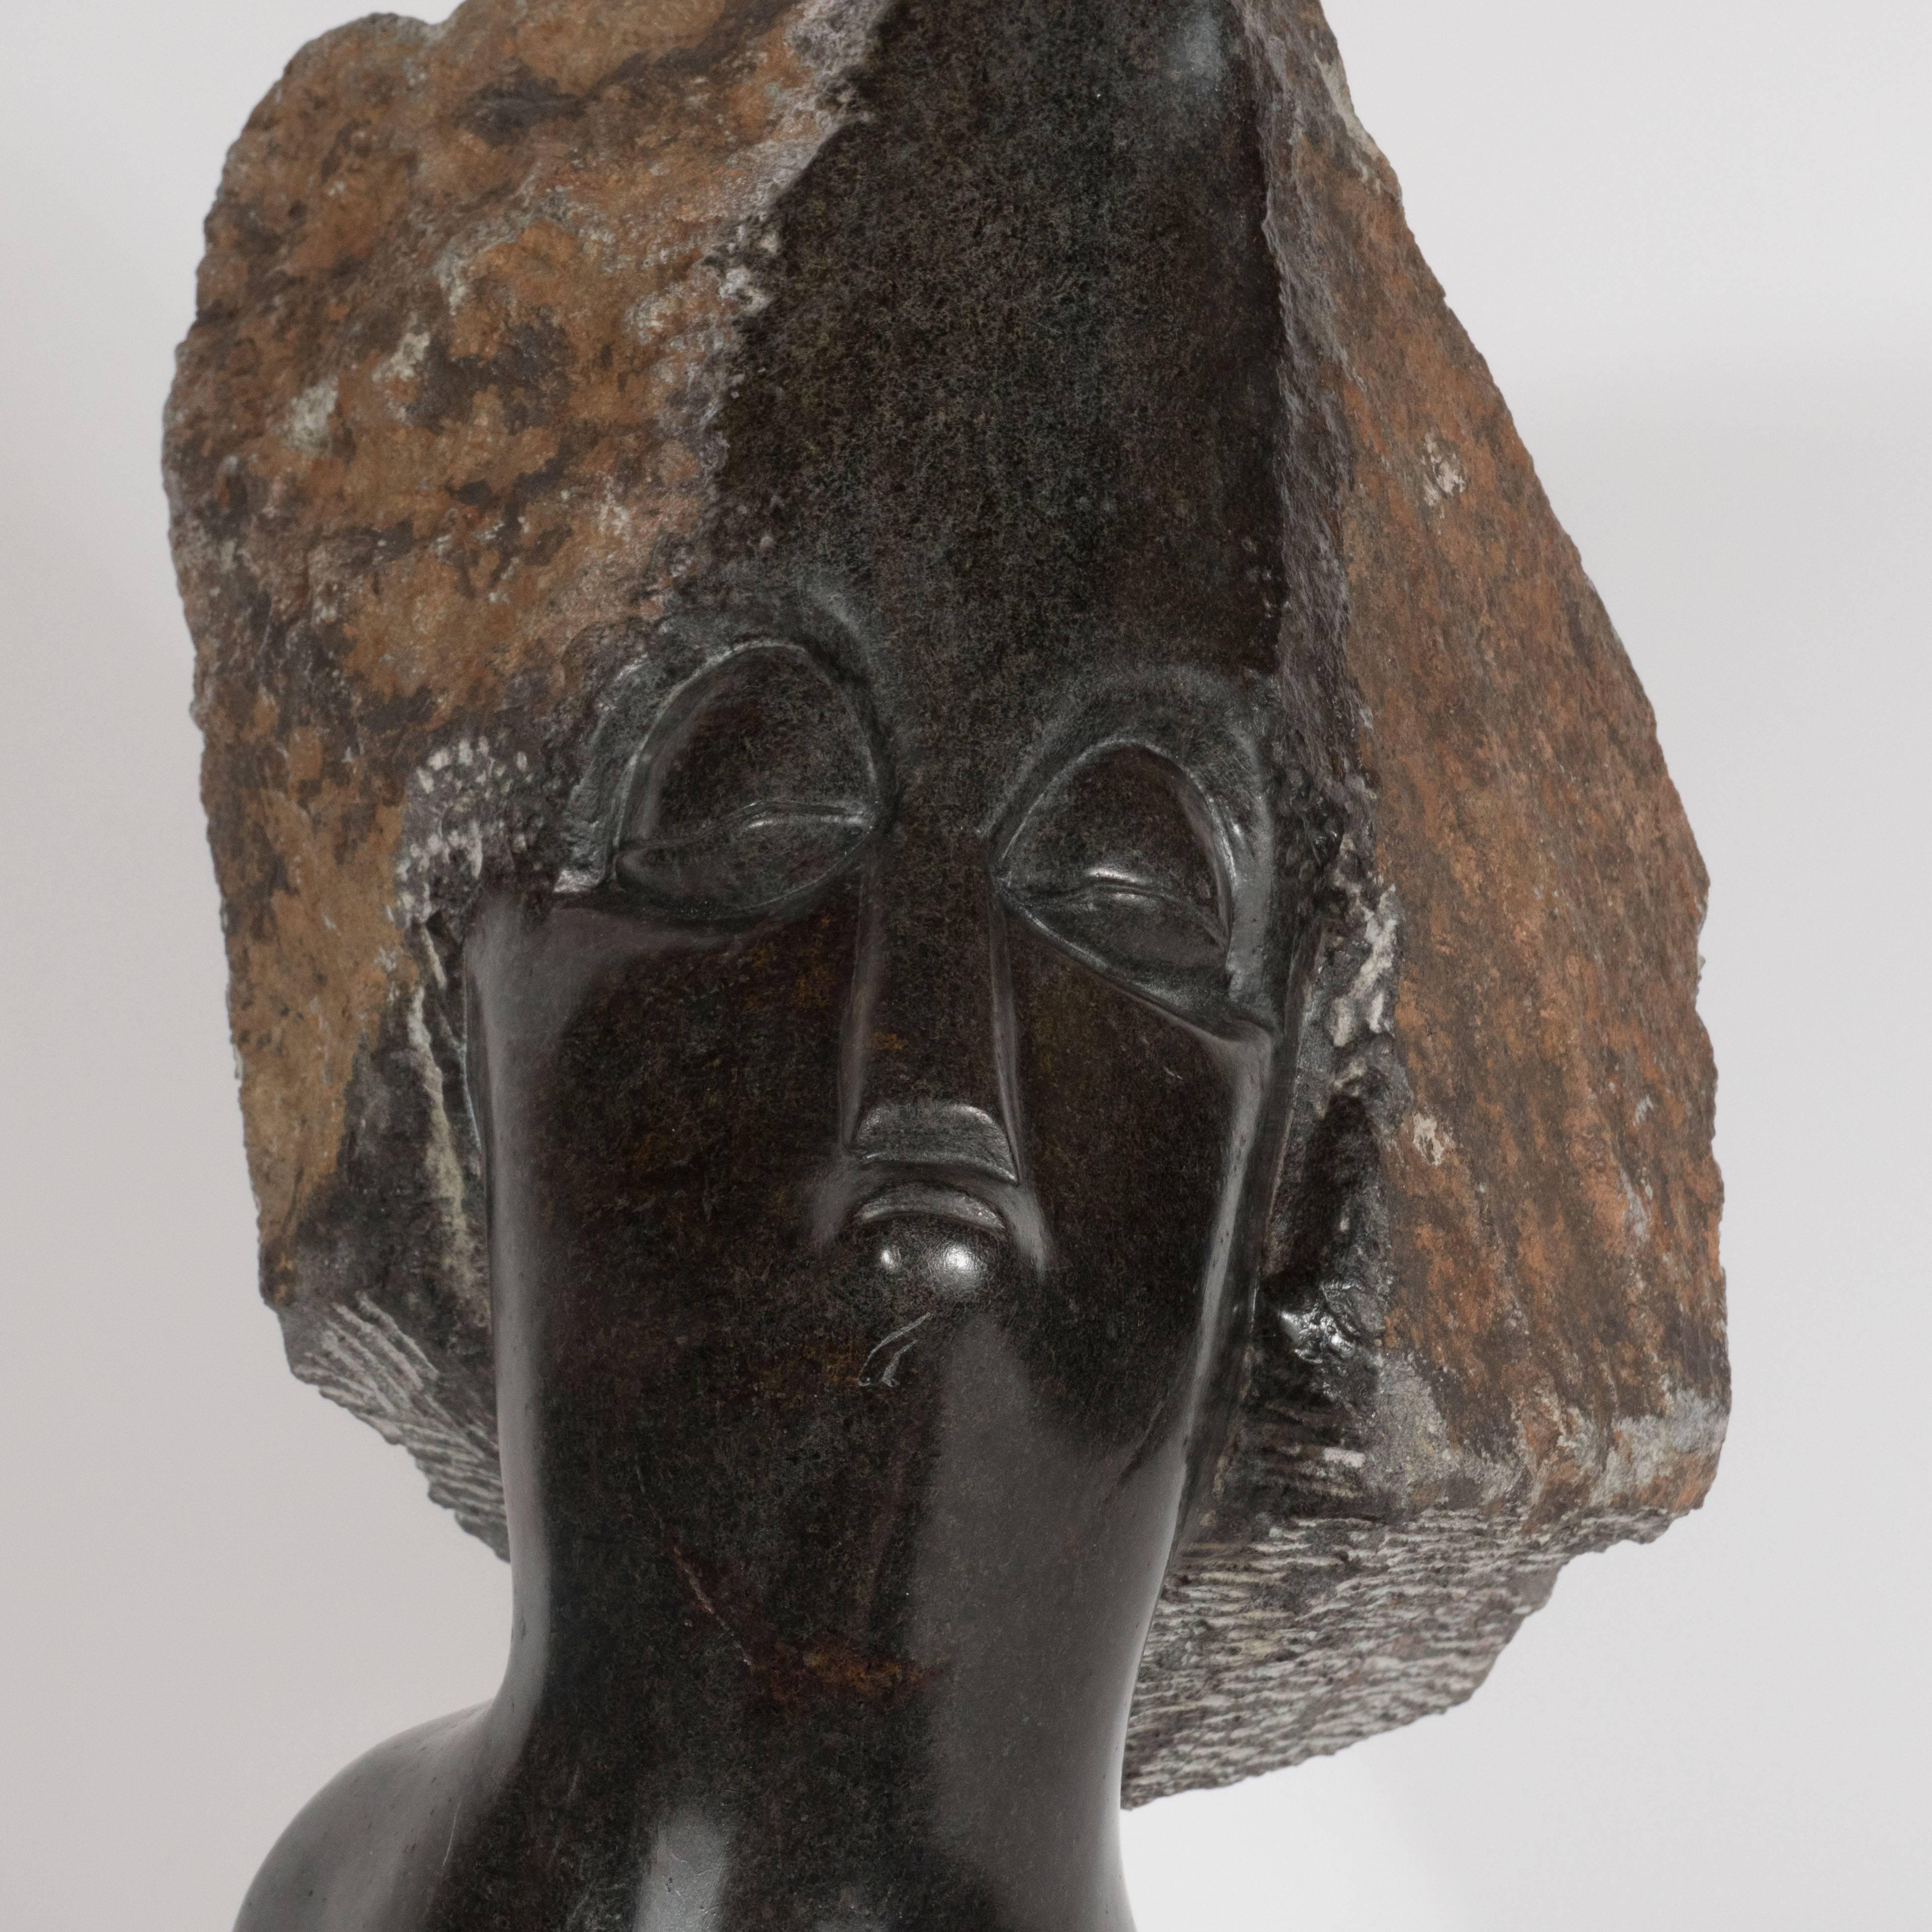 This impressive sculpture represents the marriage of tribal art with western techniques and materials. Realized in the style of Constantin Brancusi, this figurative bust presents a stylized face chiseled into black marble. The female visage appears